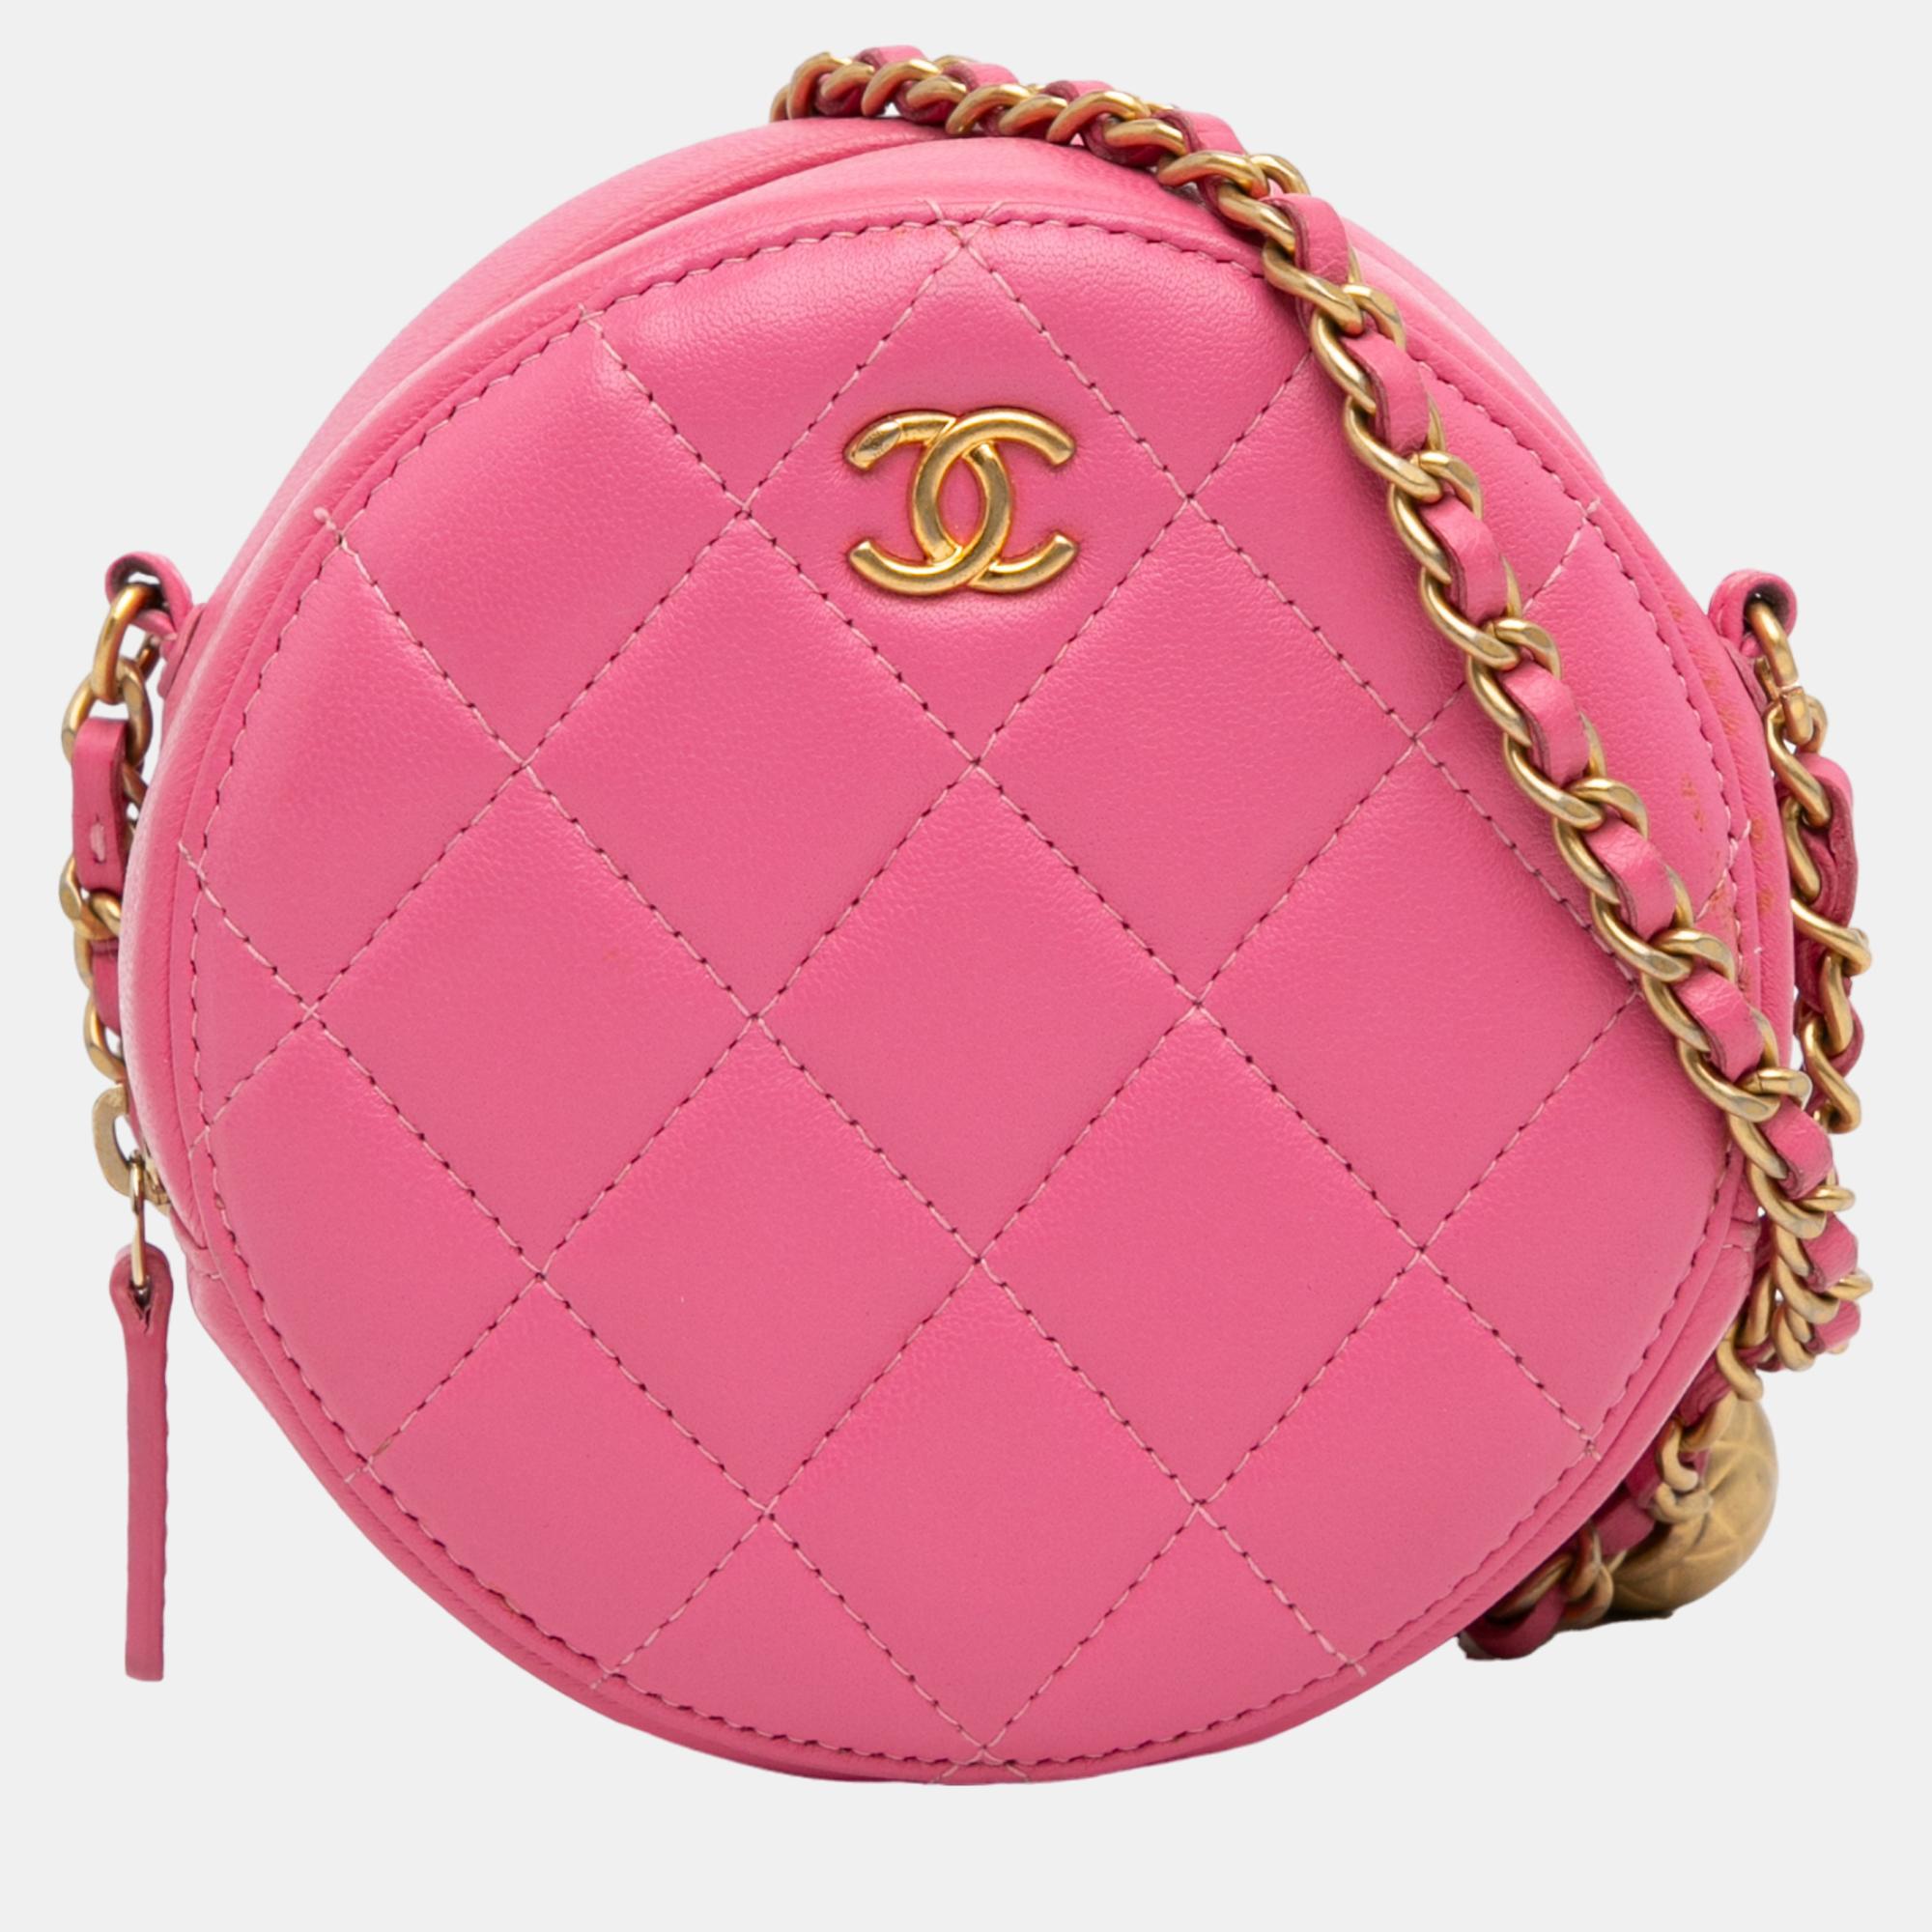 Chanel pink quilted lambskin round as earth crossbody